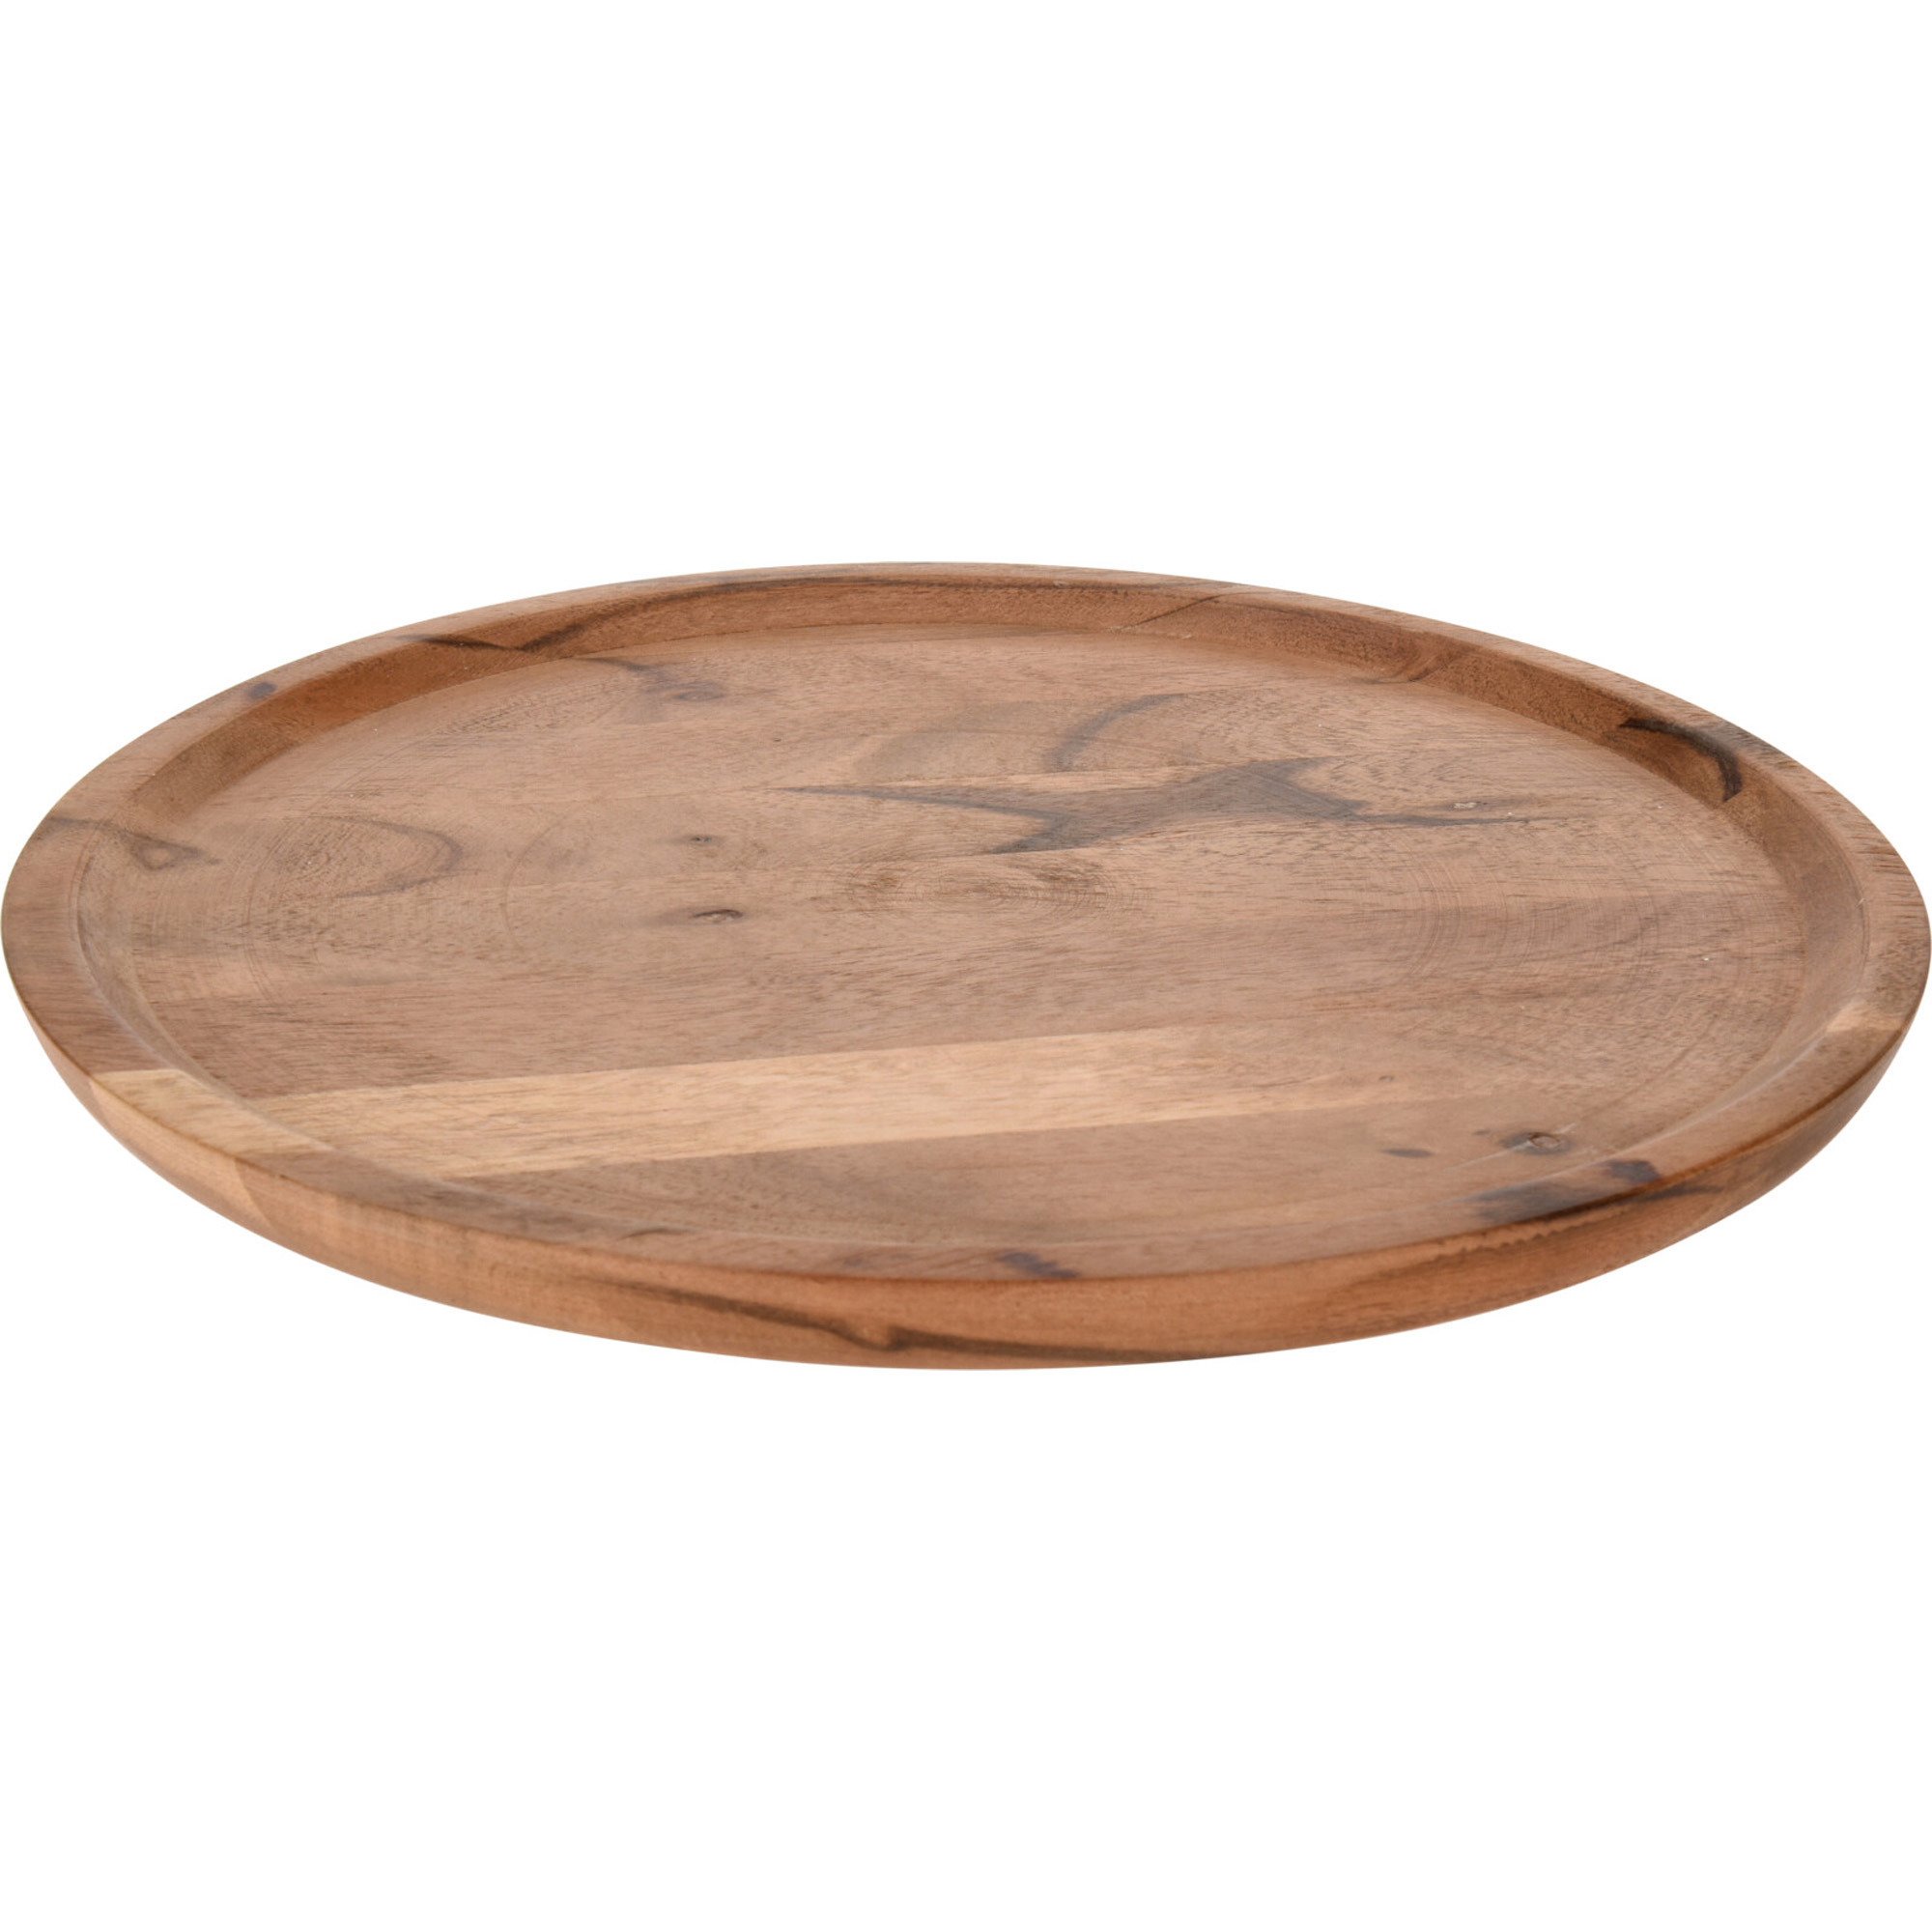 H&S Collection Kaarsenplateau rond hout D28 cm kaarsenbord